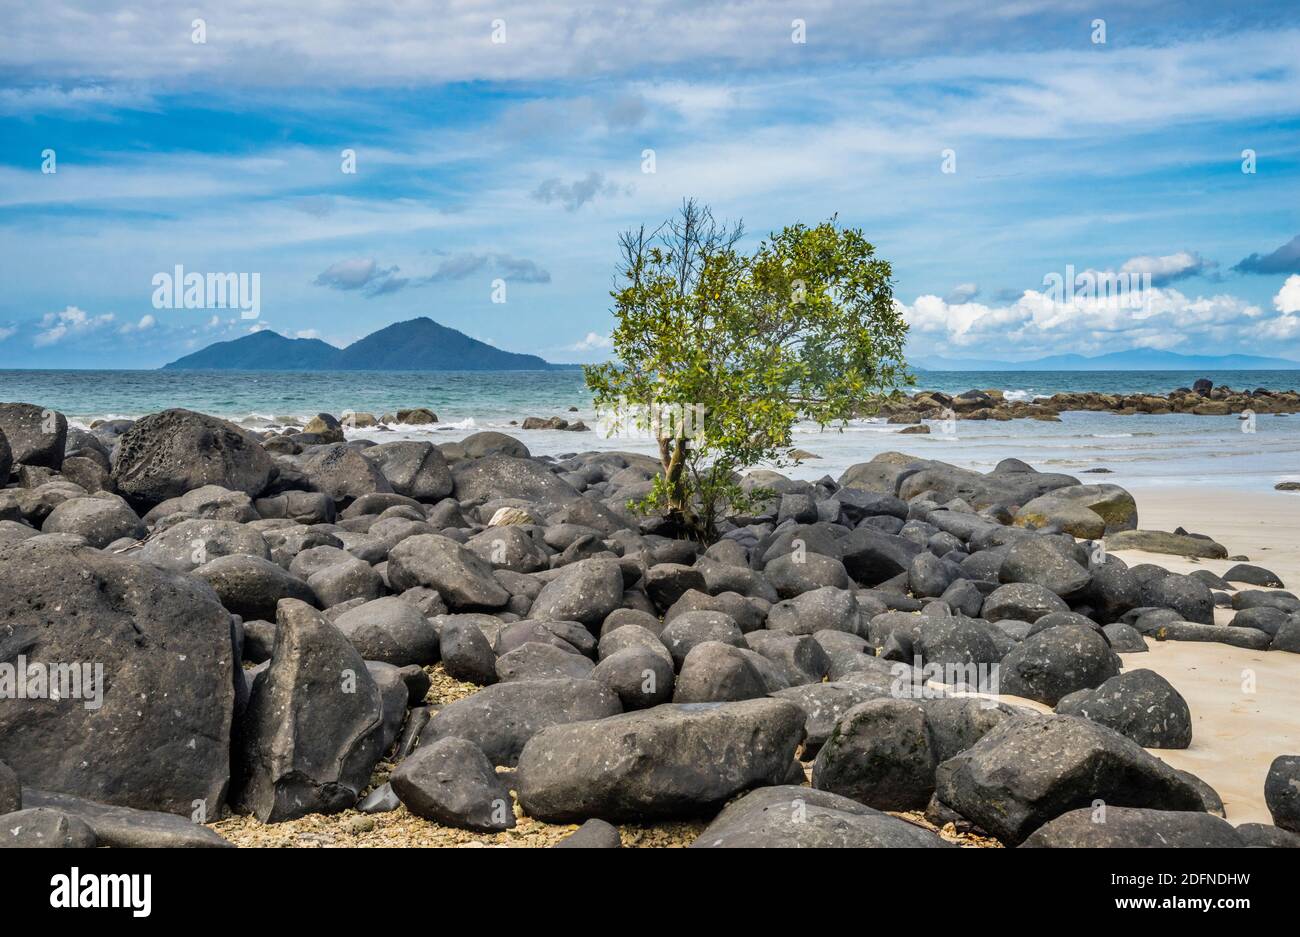 view of Dunk Island from Clump Point, Mission Beach, Cassowary Coast Region, Queensland, Australia Stock Photo